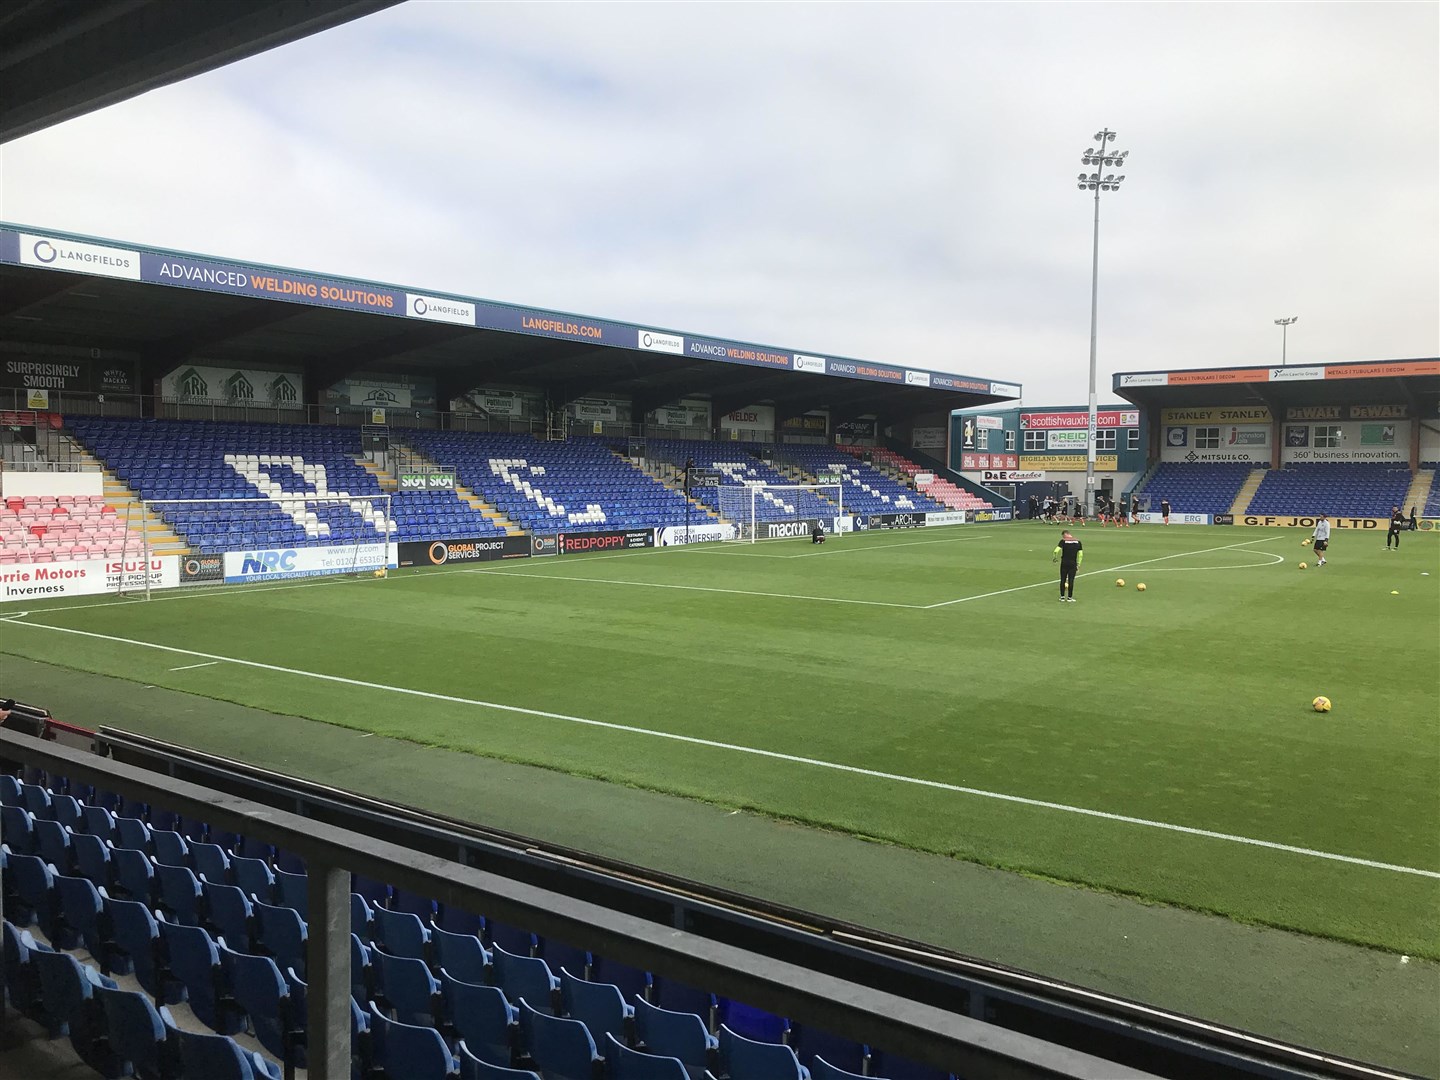 Ross County take on Dundee United at Global Energy Stadium.